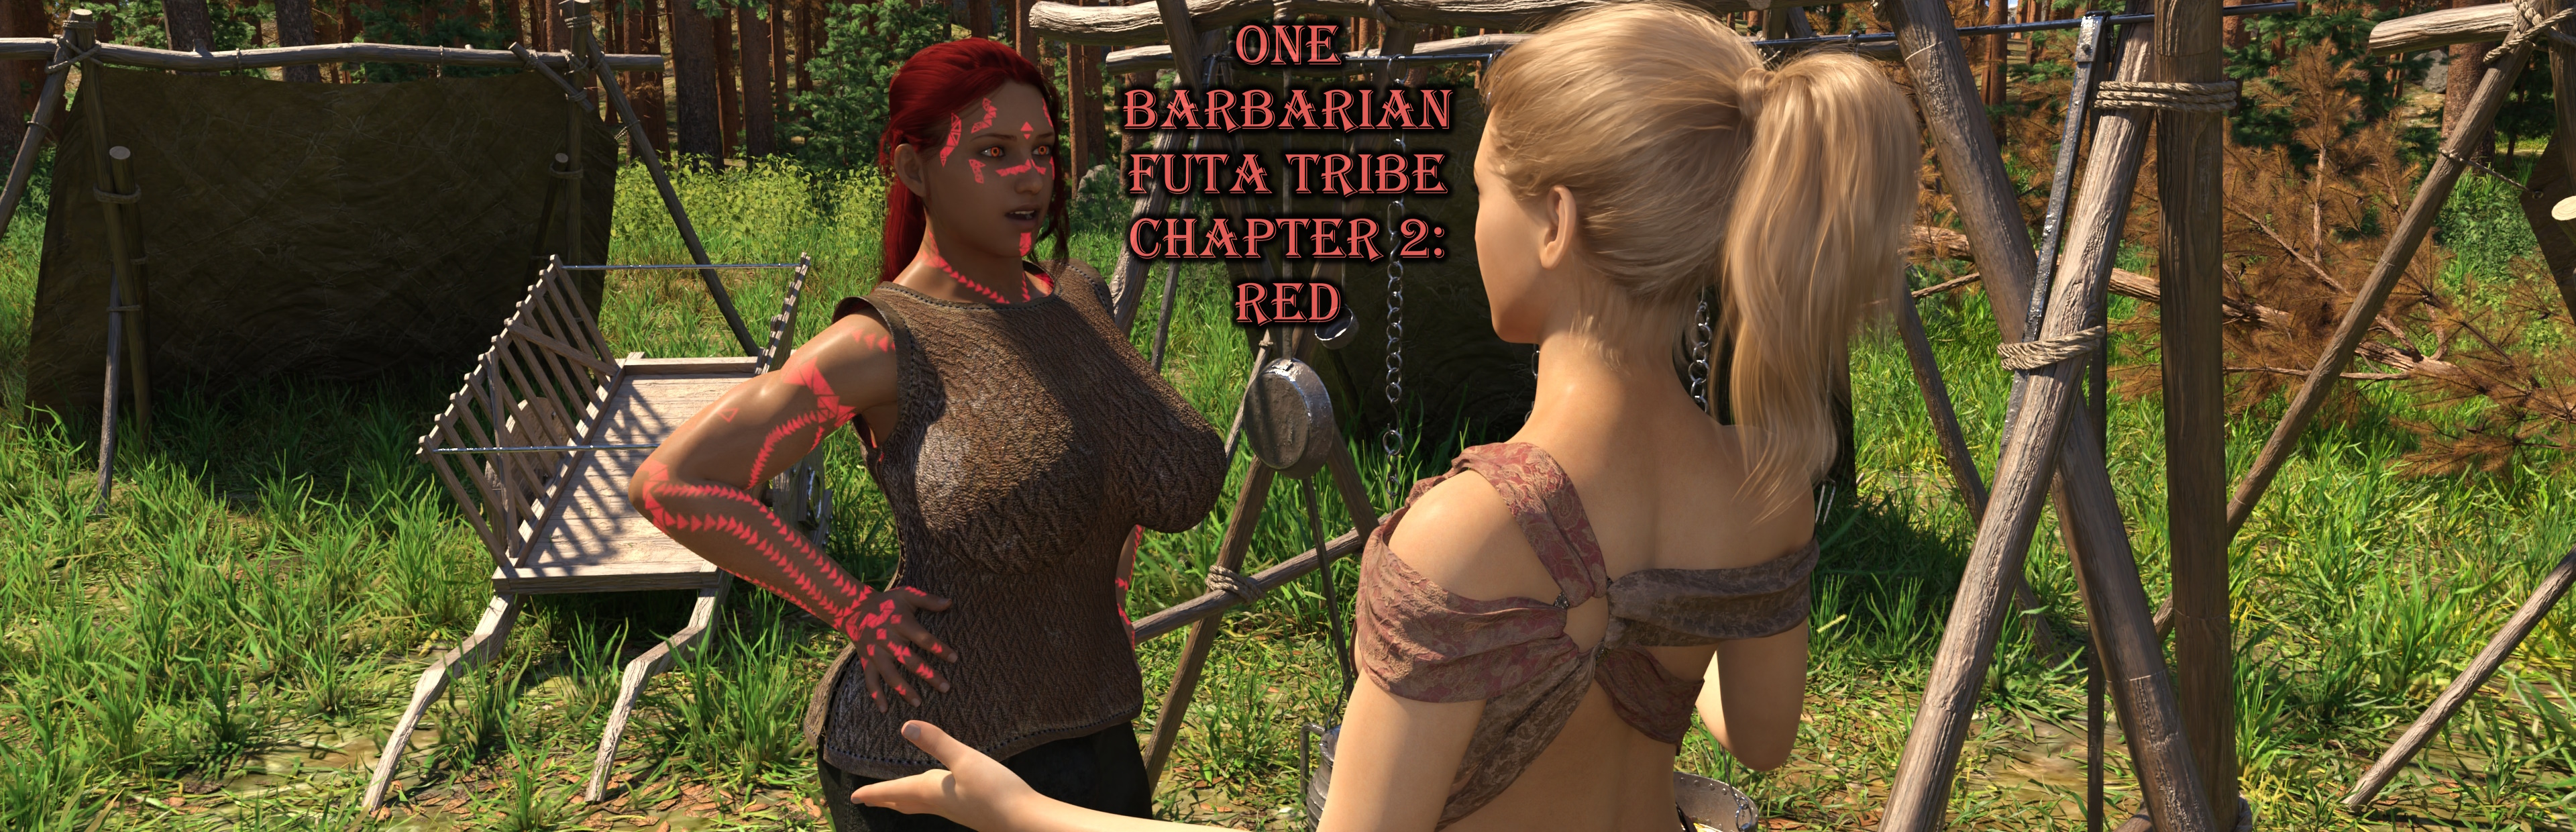 One Barbarian Futa Tribe Chapter 2: Red poster